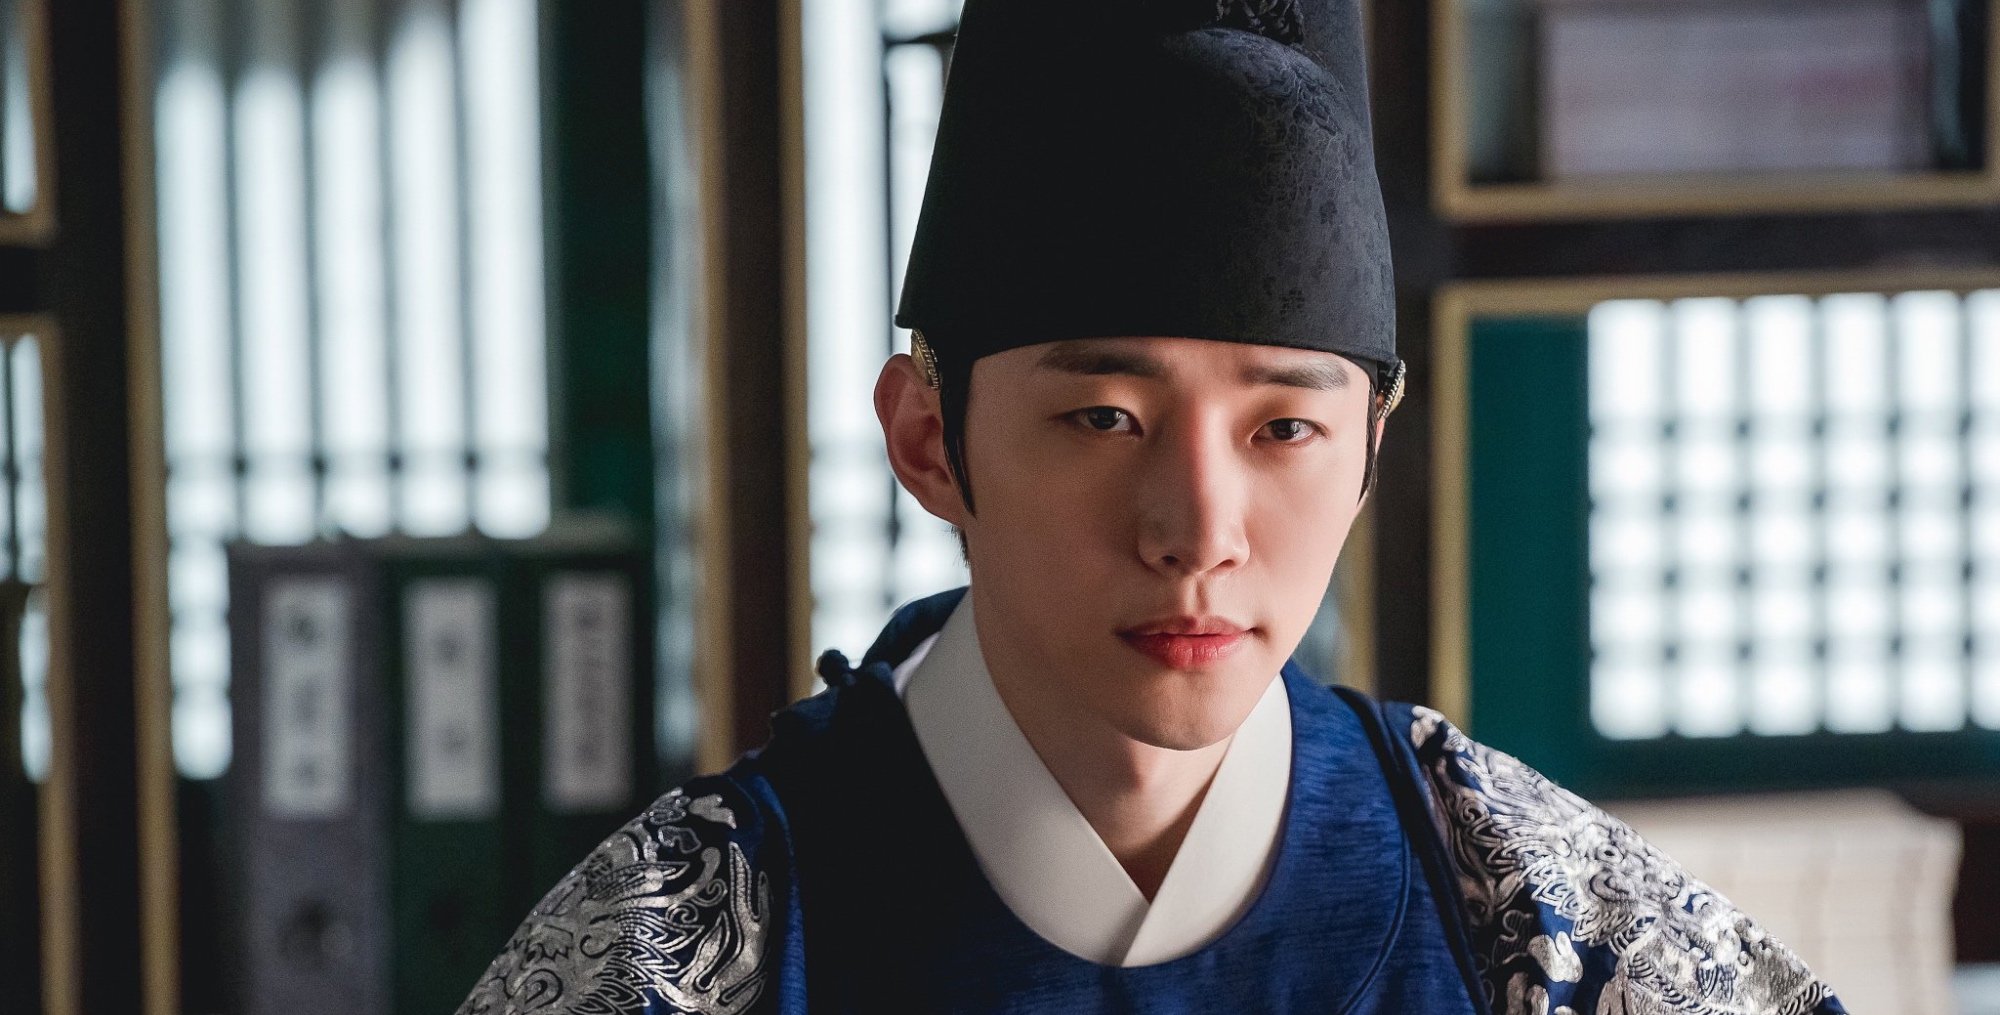 Lee Junho in 'The Red Sleeve' K-drama wearing traditional royal Korean clothing.